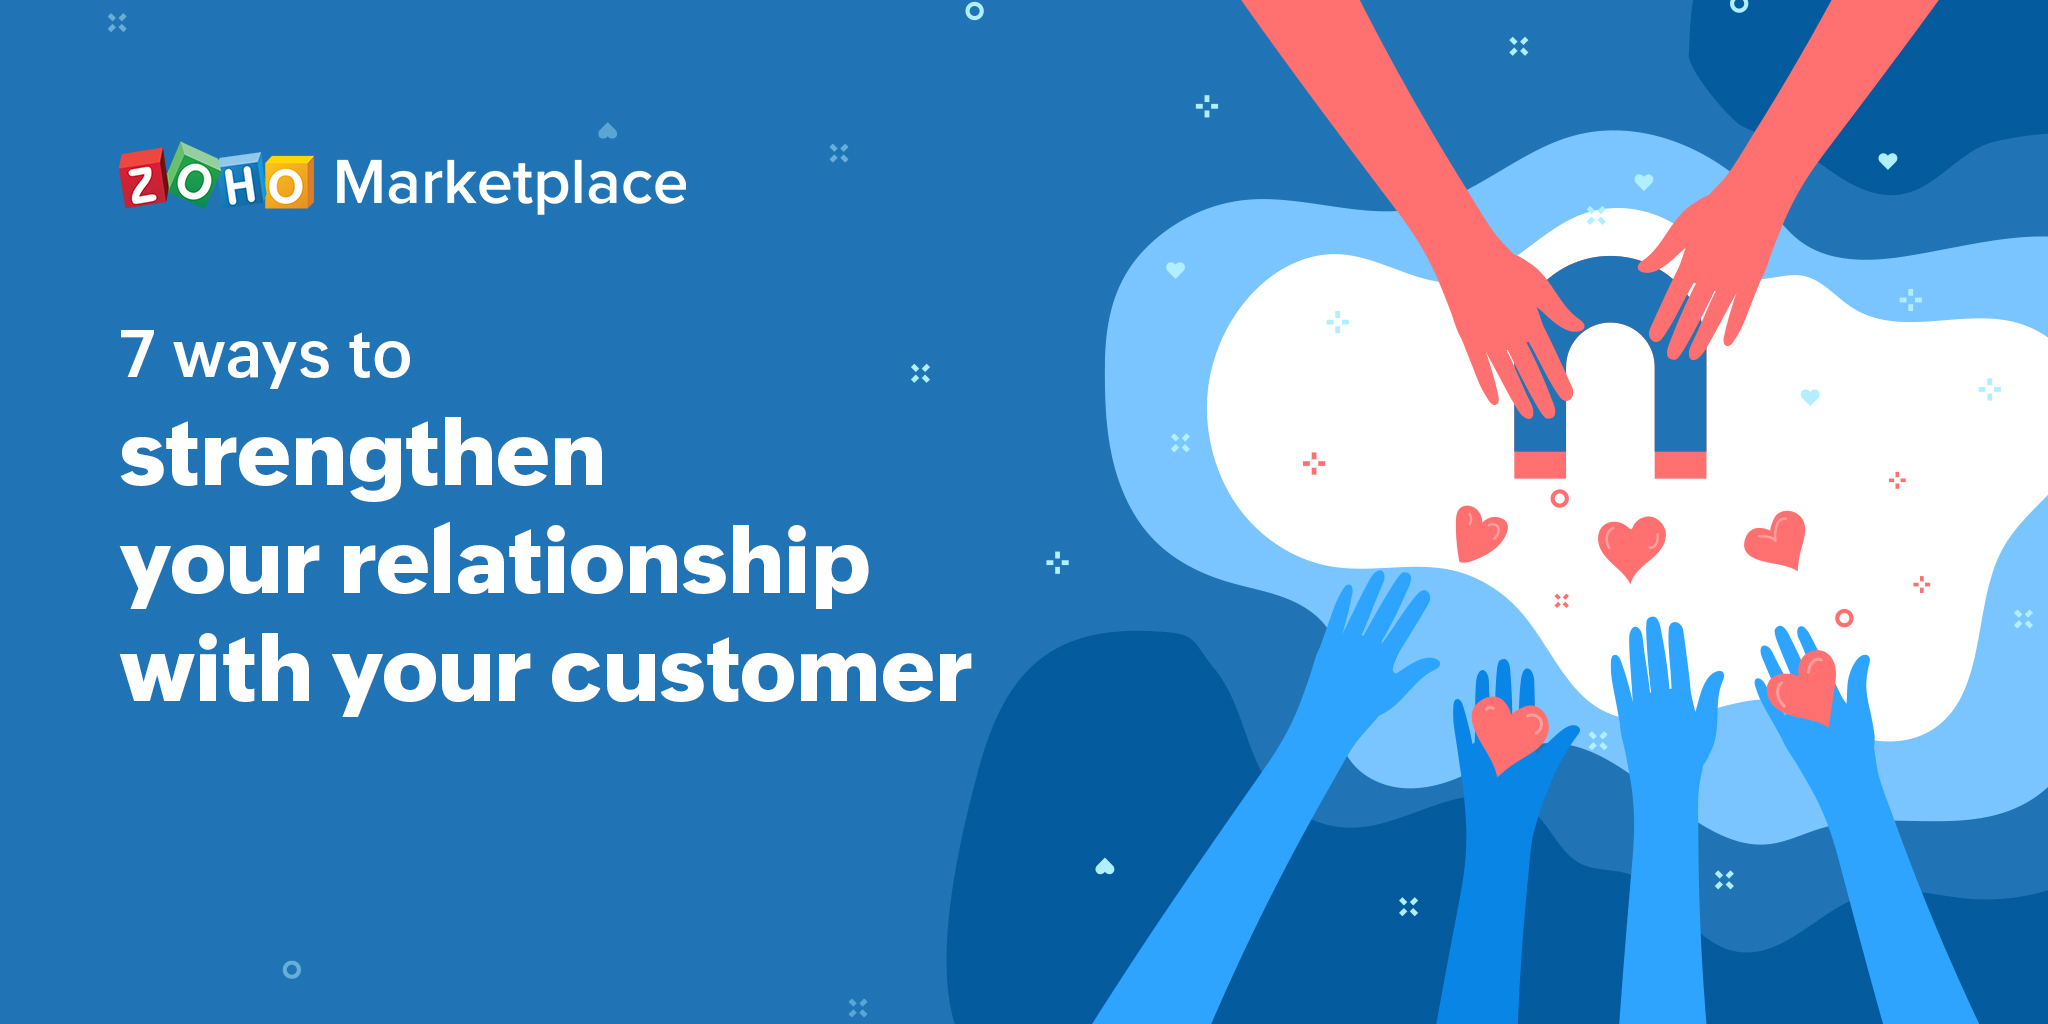 7 ways to strengthen your relationship with your customer